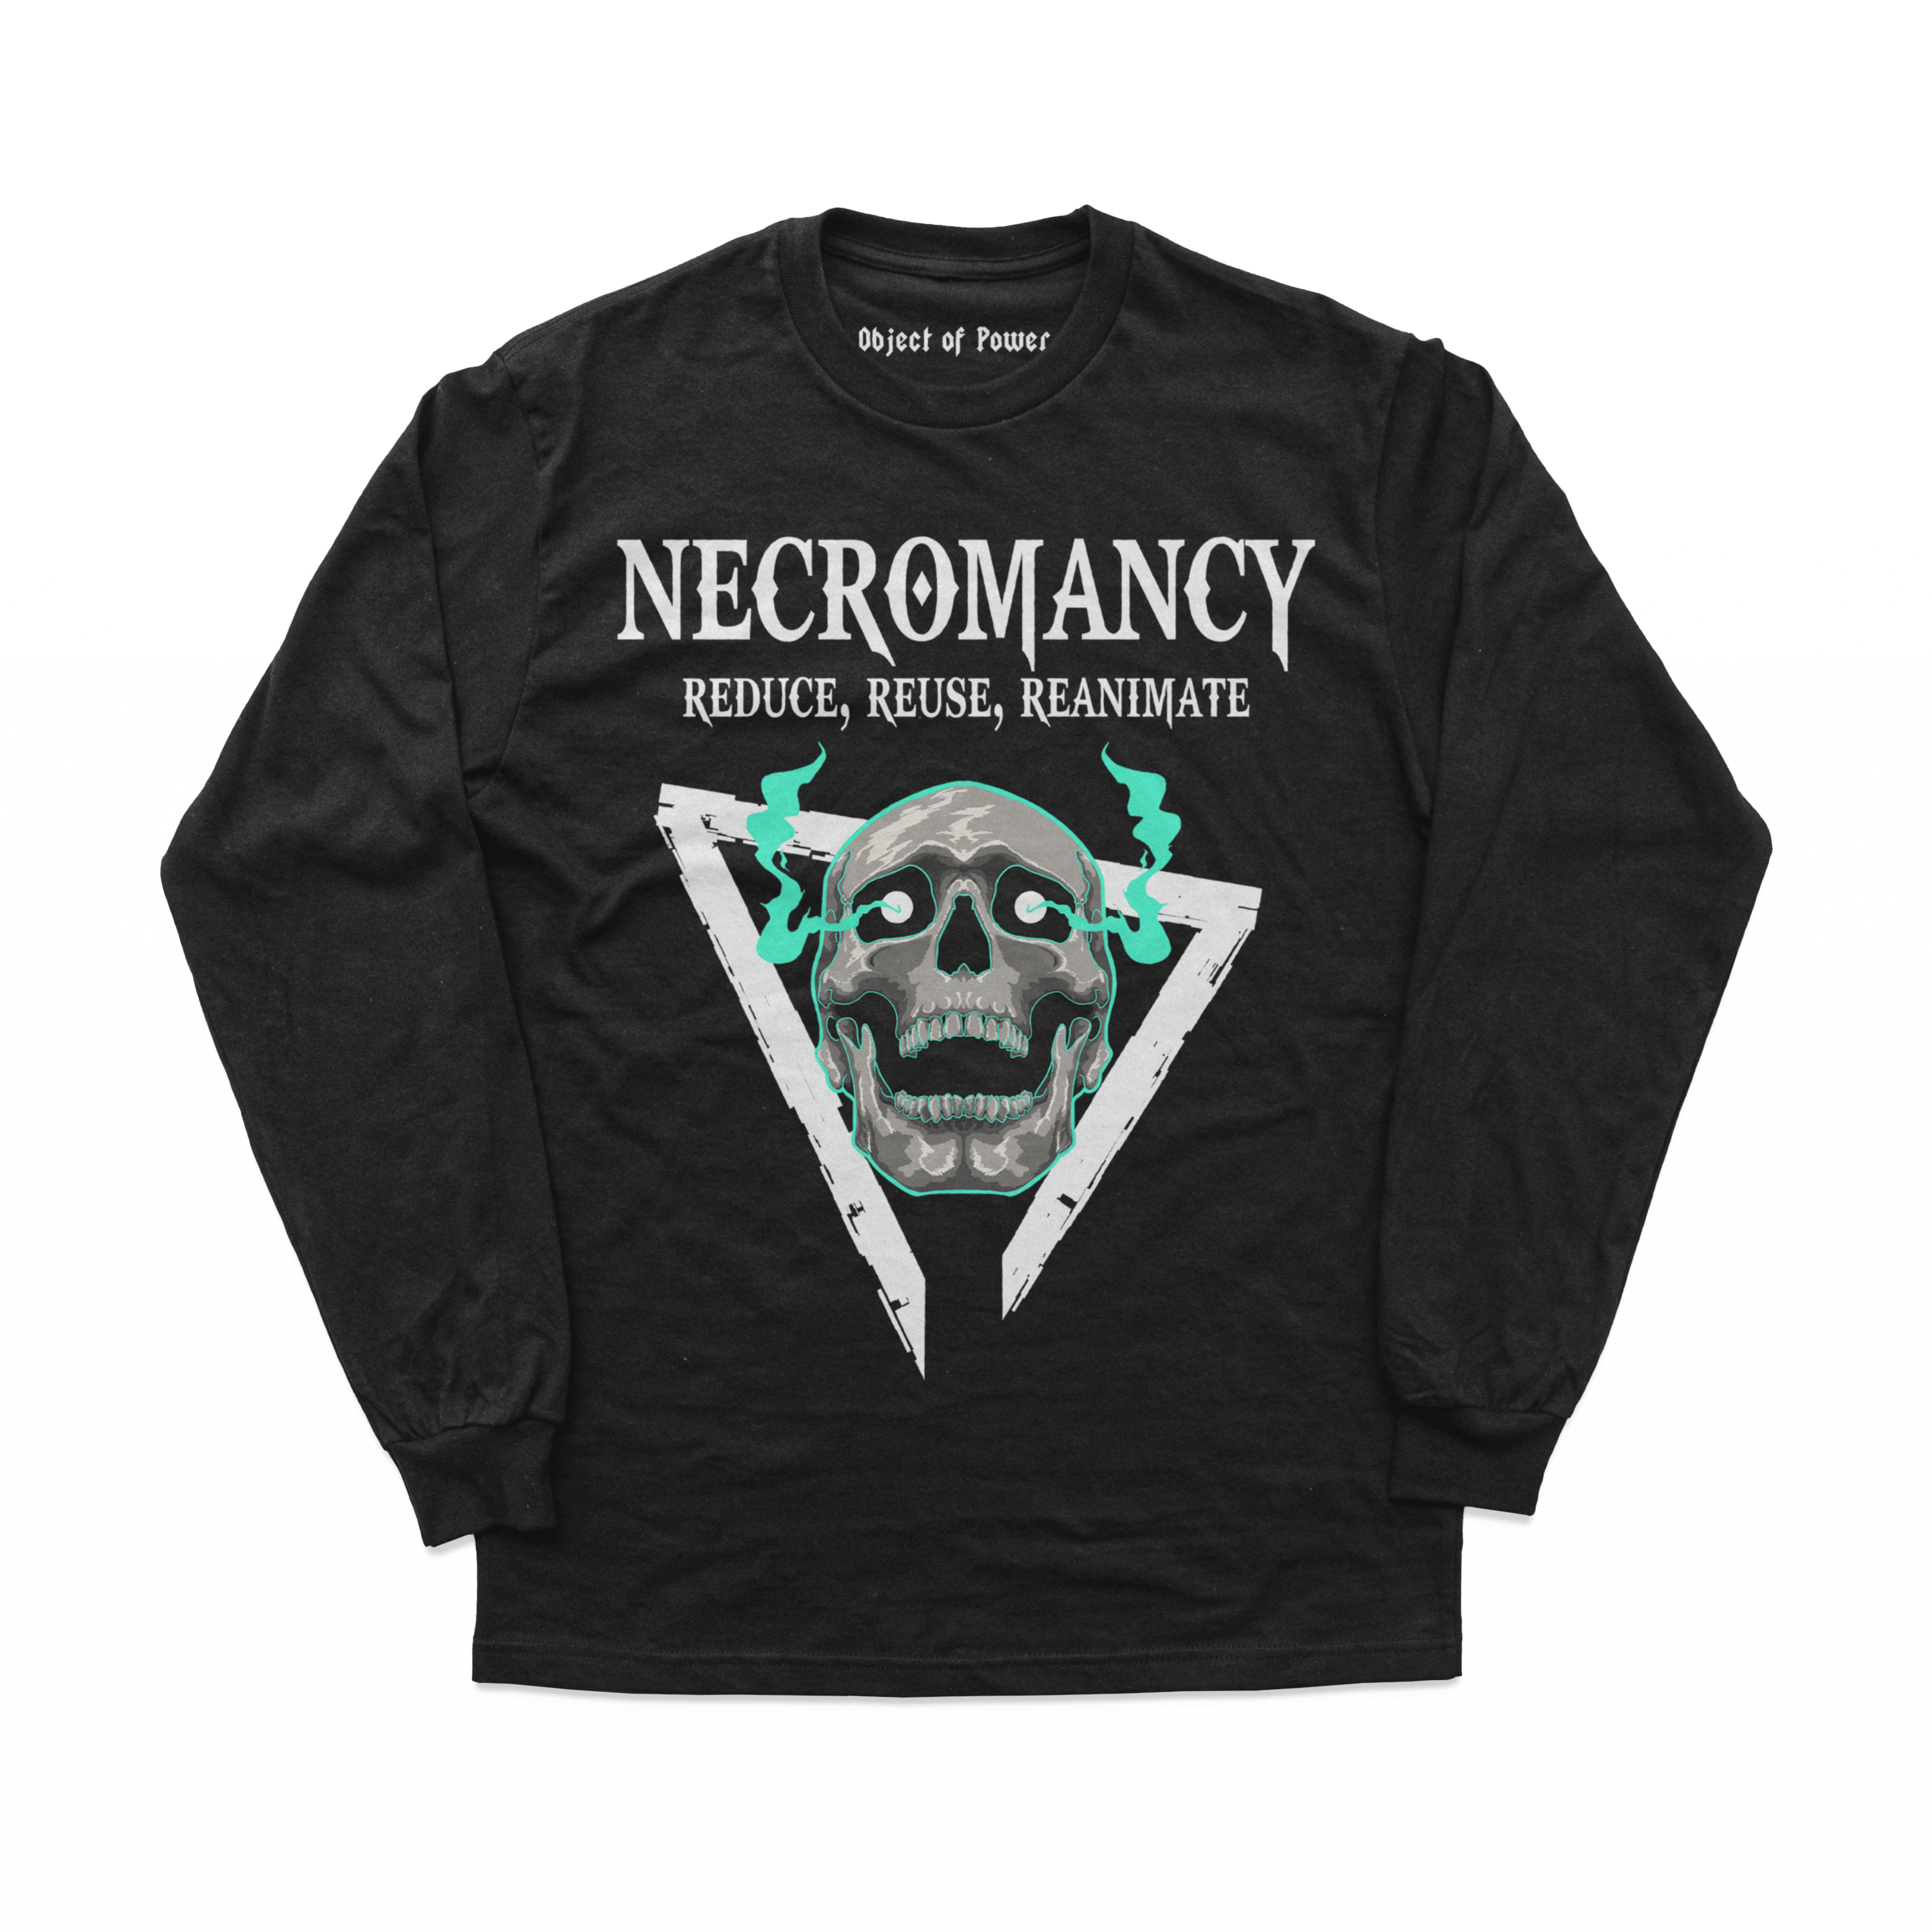 Object of Power nerdy gamer anime tabletop roleplaying Long Sleeve Tee Necromantic Environmentalism Long Sleeve Tee Front Prints / Black / XS